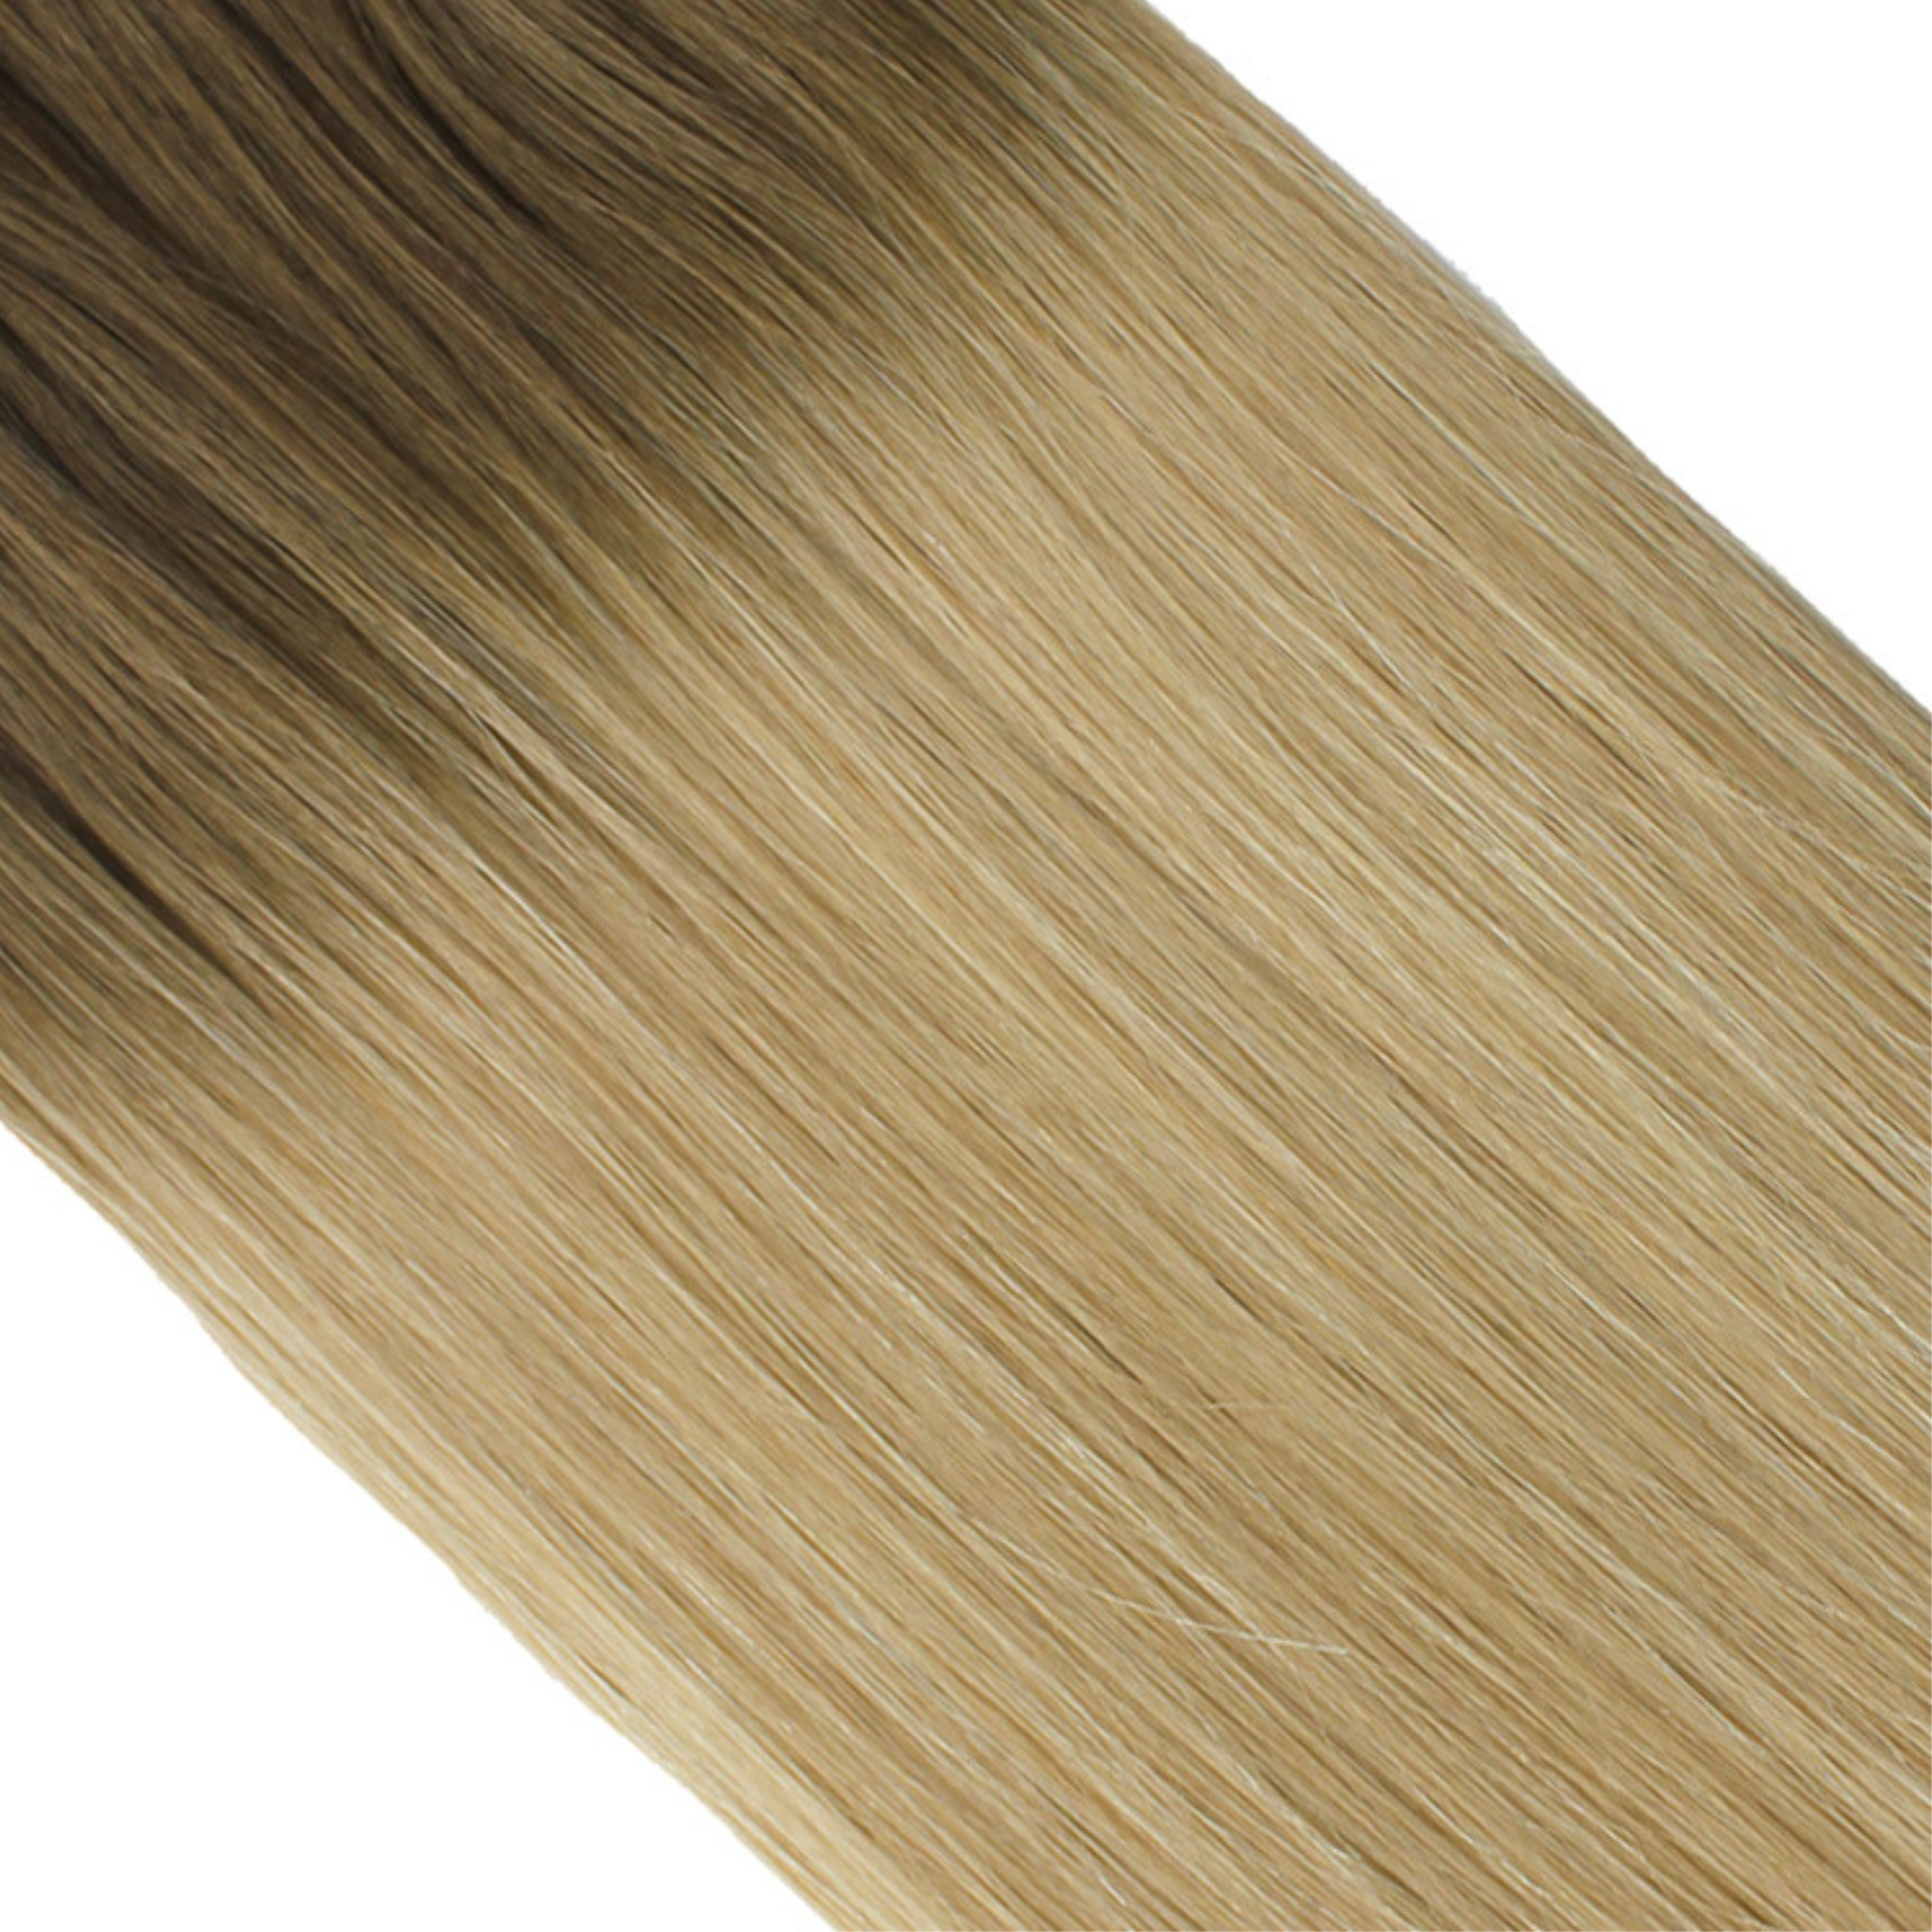 "hair rehab london 18" length 120 grams weight original clip-in hair extensions shade titled rooted dirty blonde"